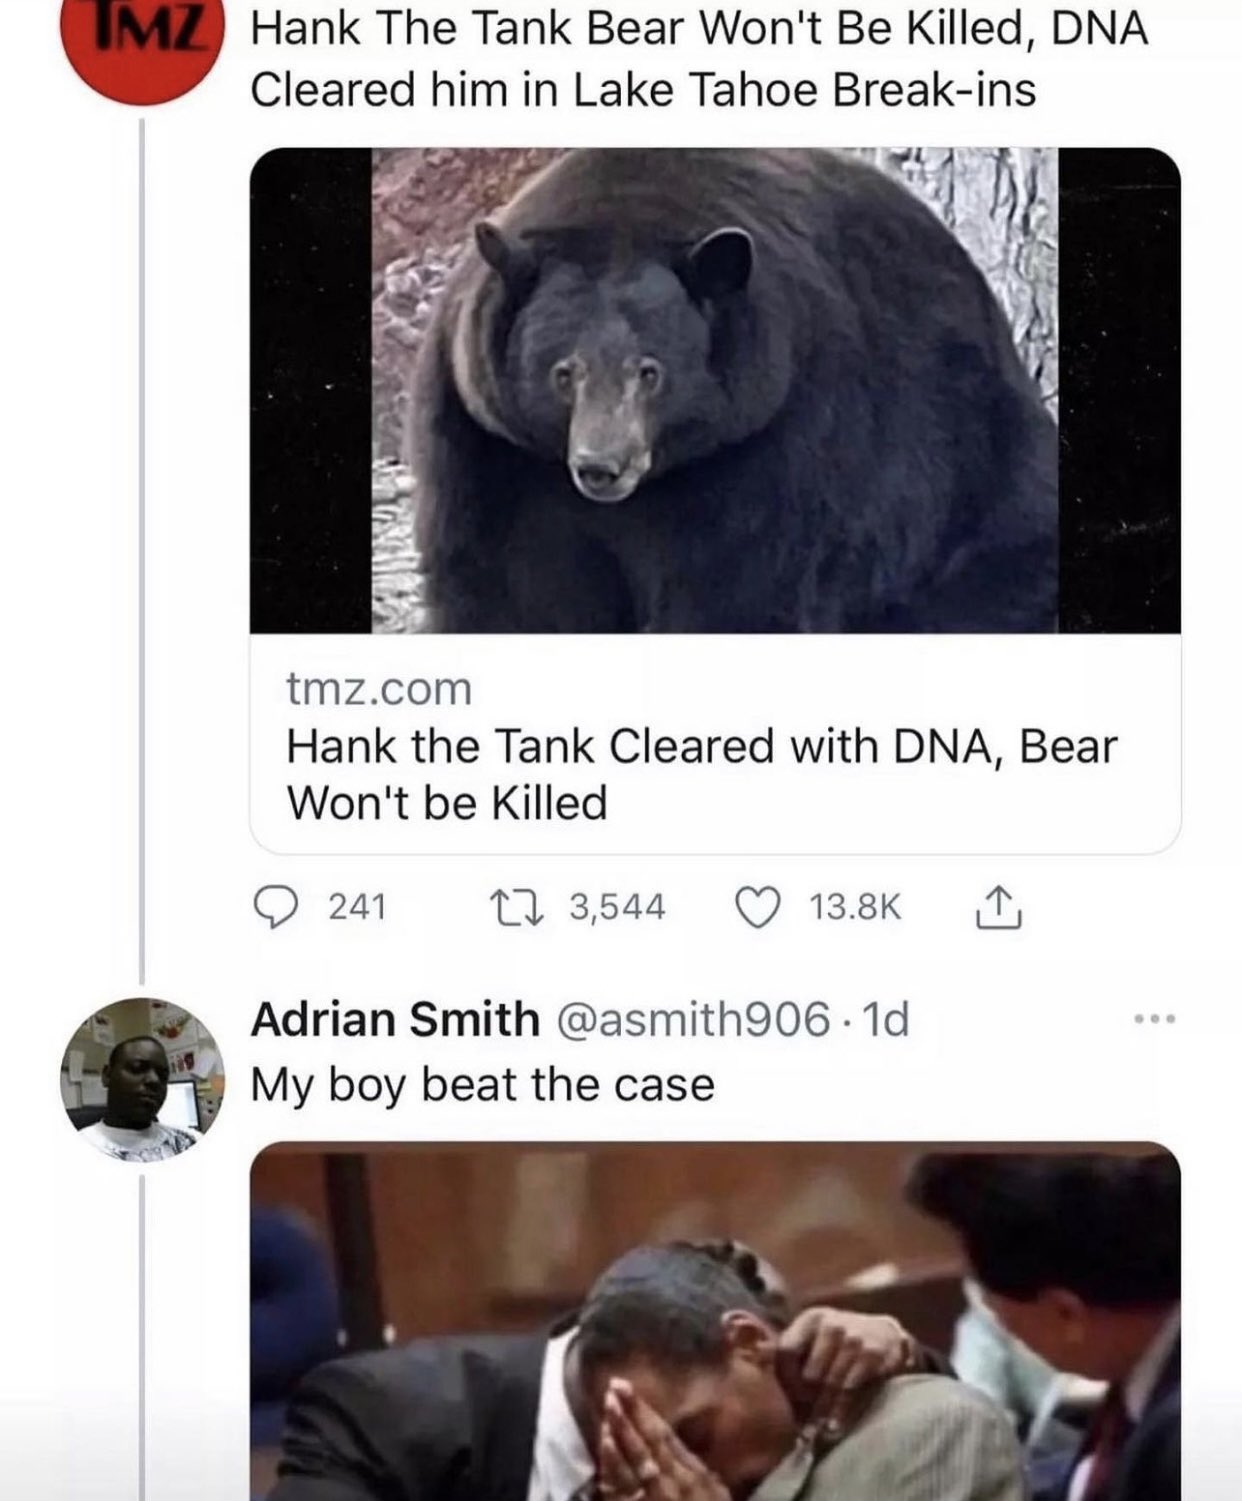 dudes posting their Ws - hank the tank cleared - Imz Hank The Tank Bear Won't Be Killed, Dna Cleared him in Lake Tahoe Breakins tmz.com Hank the Tank Cleared with Dna, Bear Won't be Killed 241 3,544 Adrian Smith .1d My boy beat the case